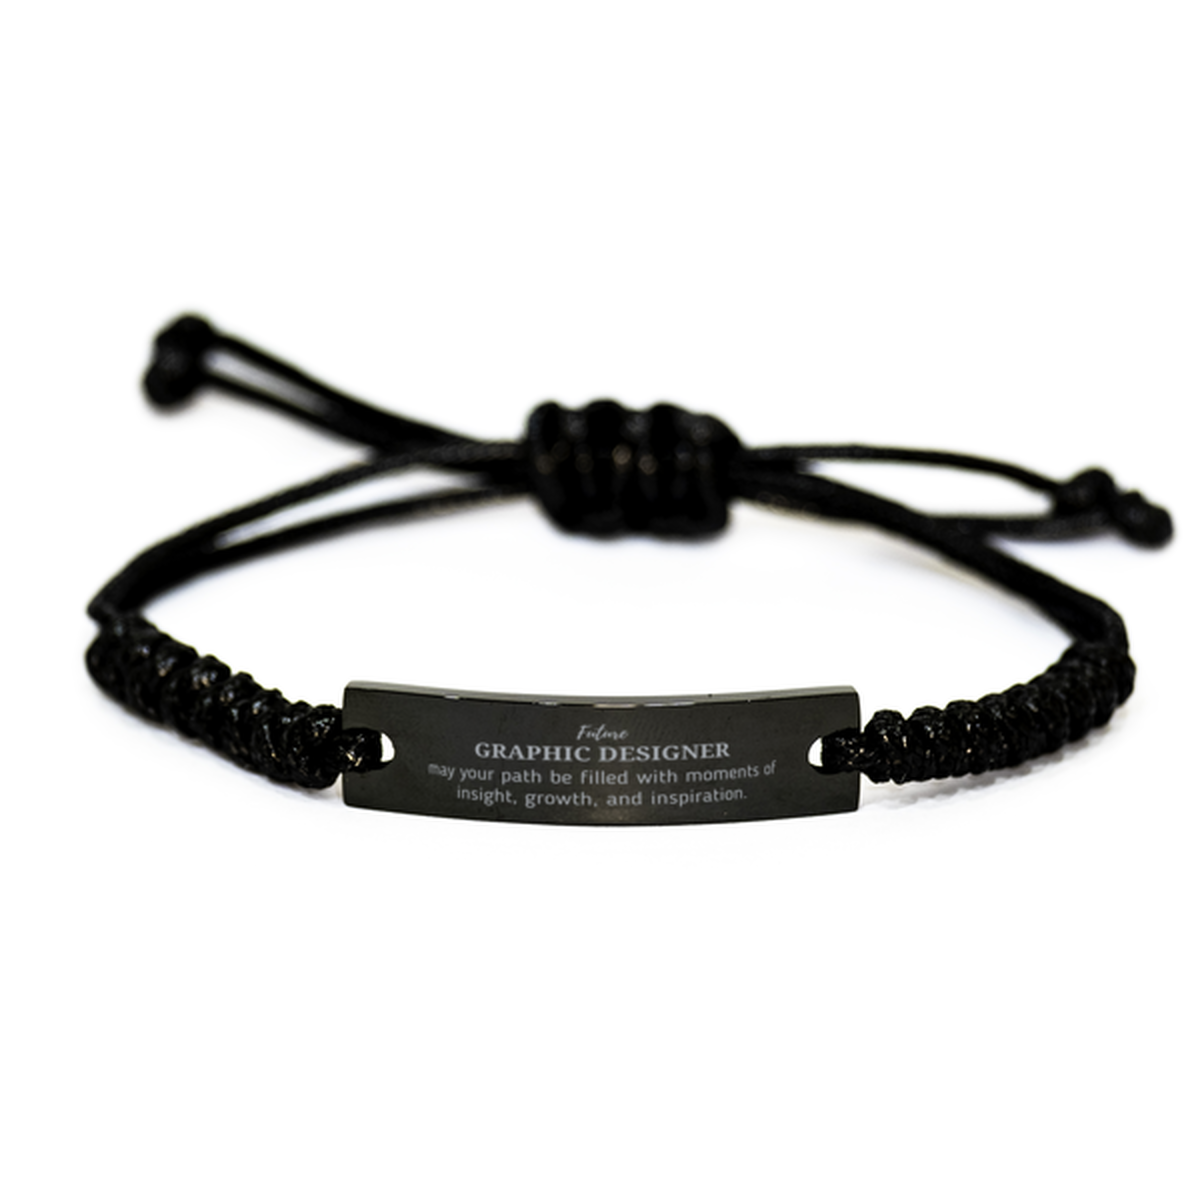 Future Graphic Designer Gifts, May your path be filled with moments of insight, Graduation Gifts for New Graphic Designer, Christmas Unique Black Rope Bracelet For Men, Women, Friends